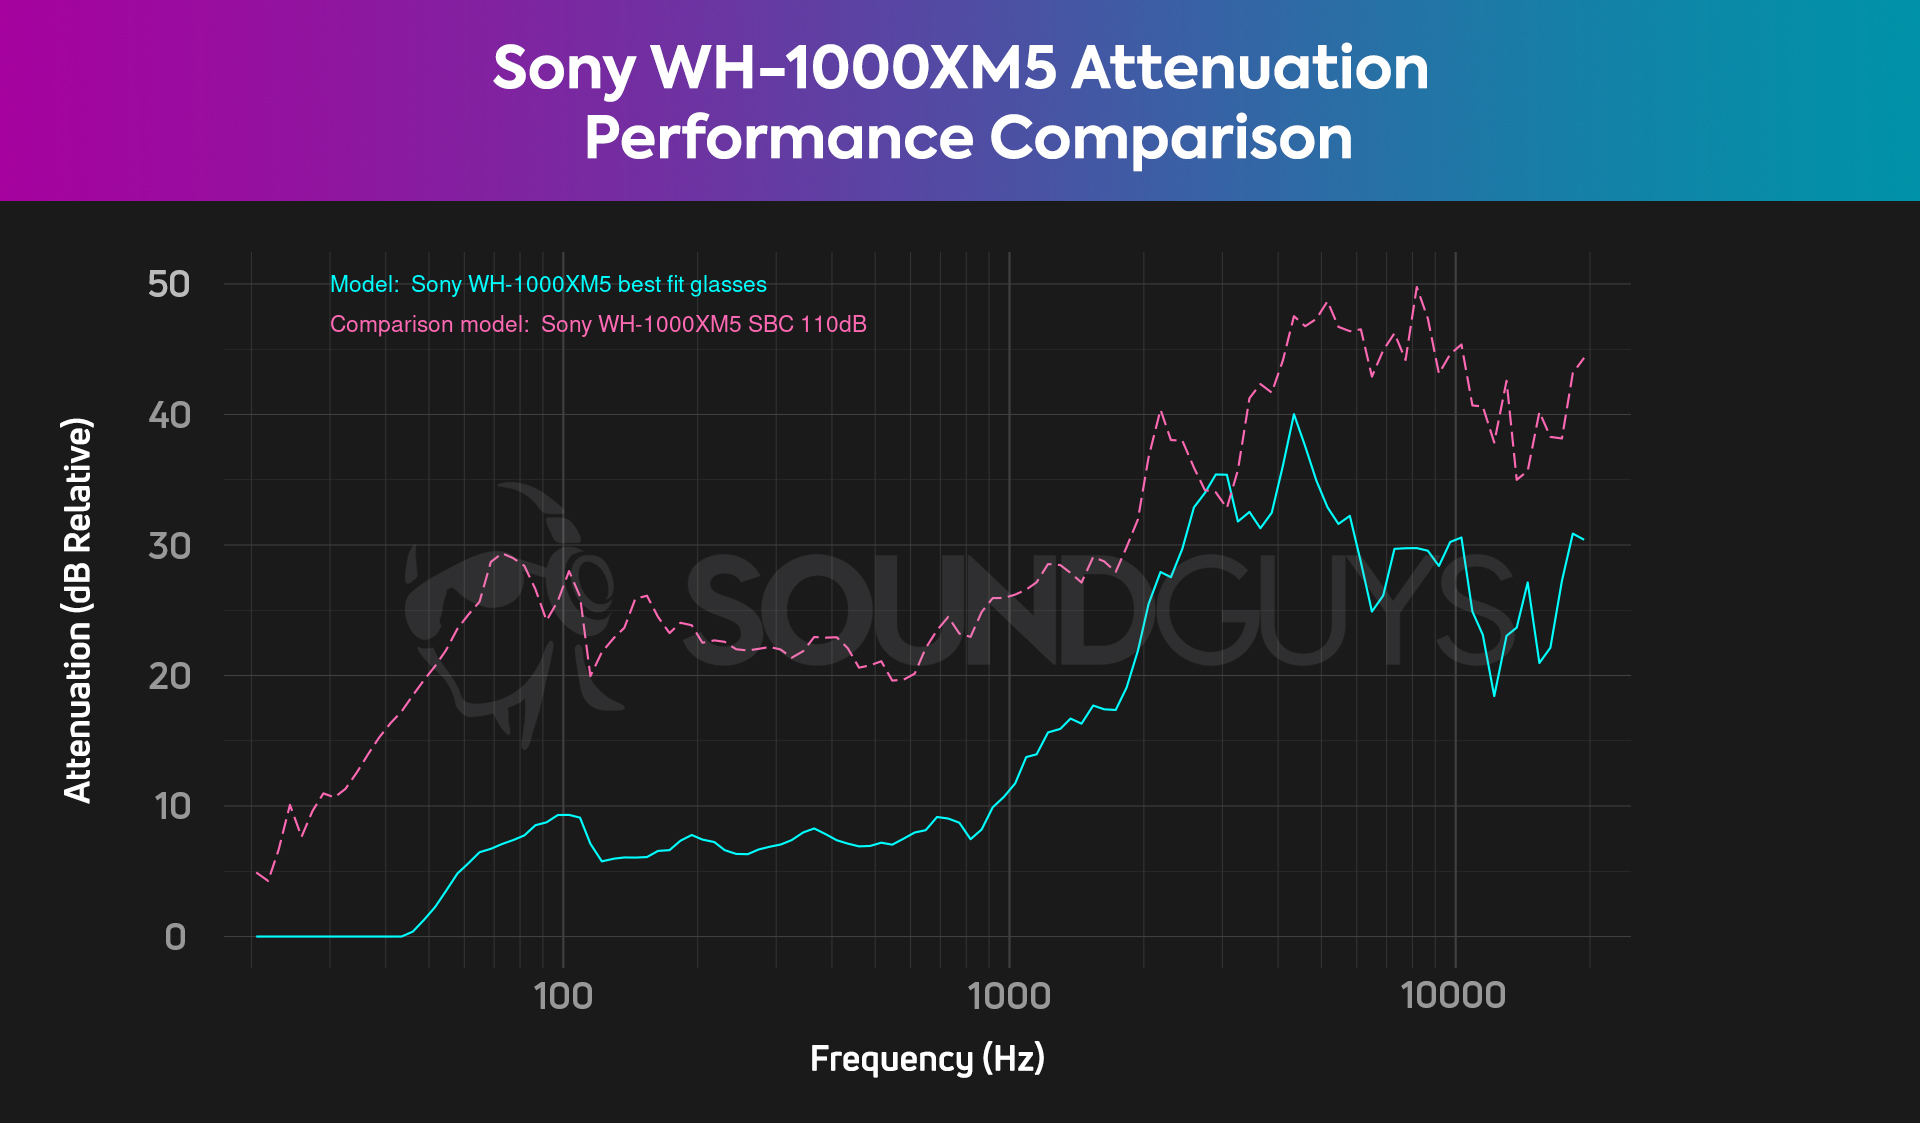 When you wear glasses, you can inadvertently make the ANC less effective with the Sony WH-1000XM5.